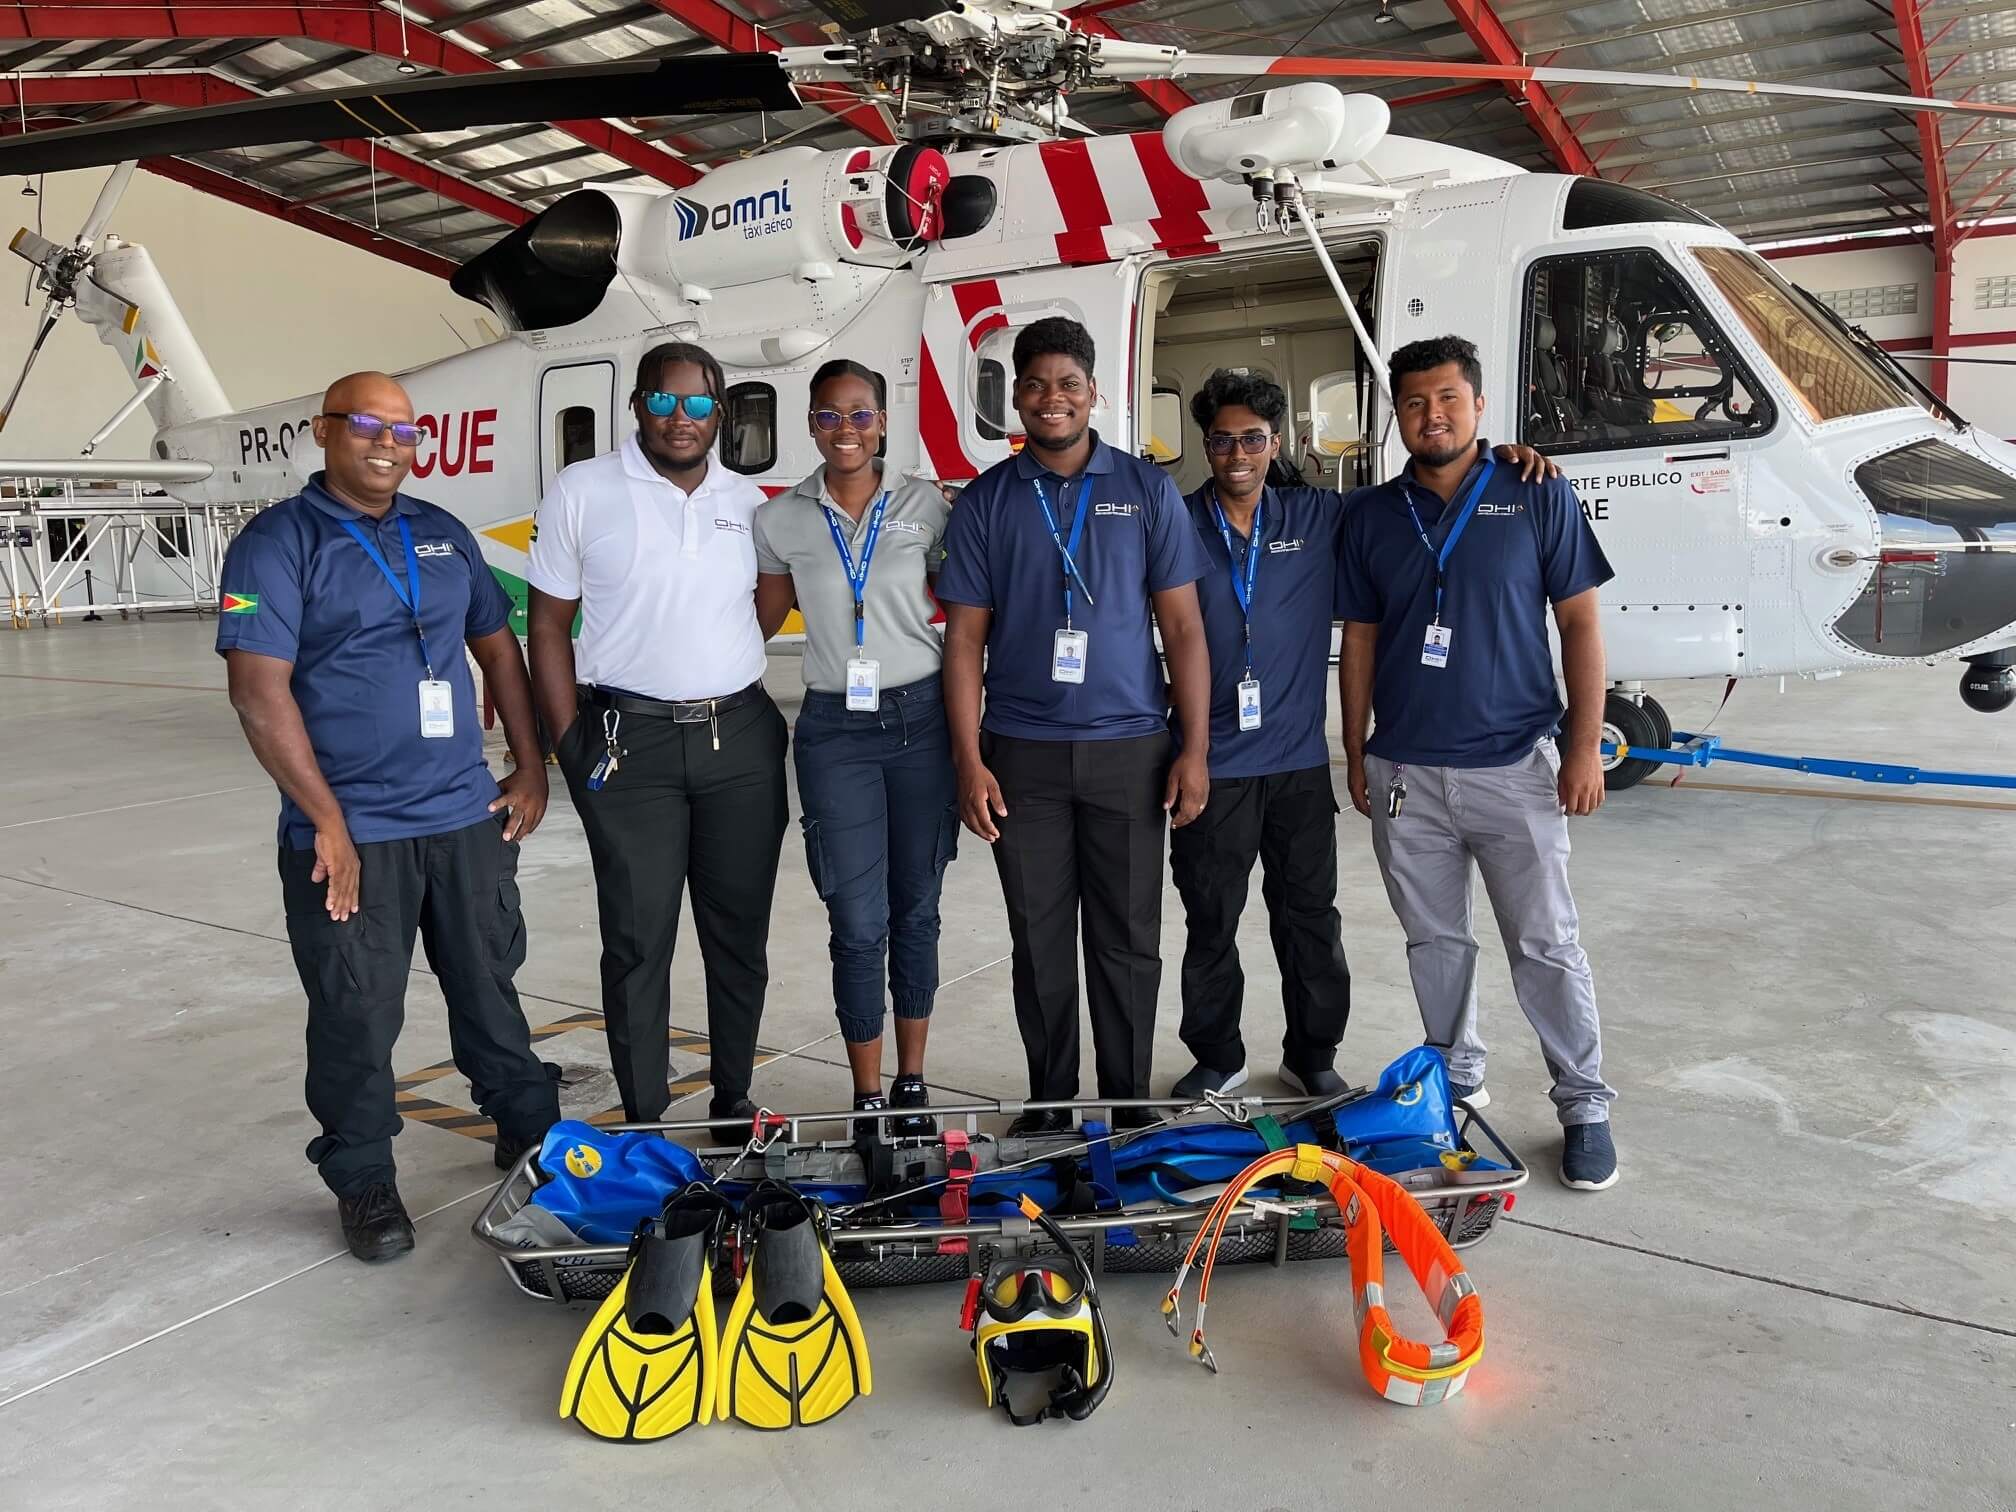 From left: Ishwar Parbhu, Daniel Yorris, Johnelle Ogle, Kevin Sawh, Somant Heeralall, and Curt Mendonca. Omni Helicopters Guyana Photo